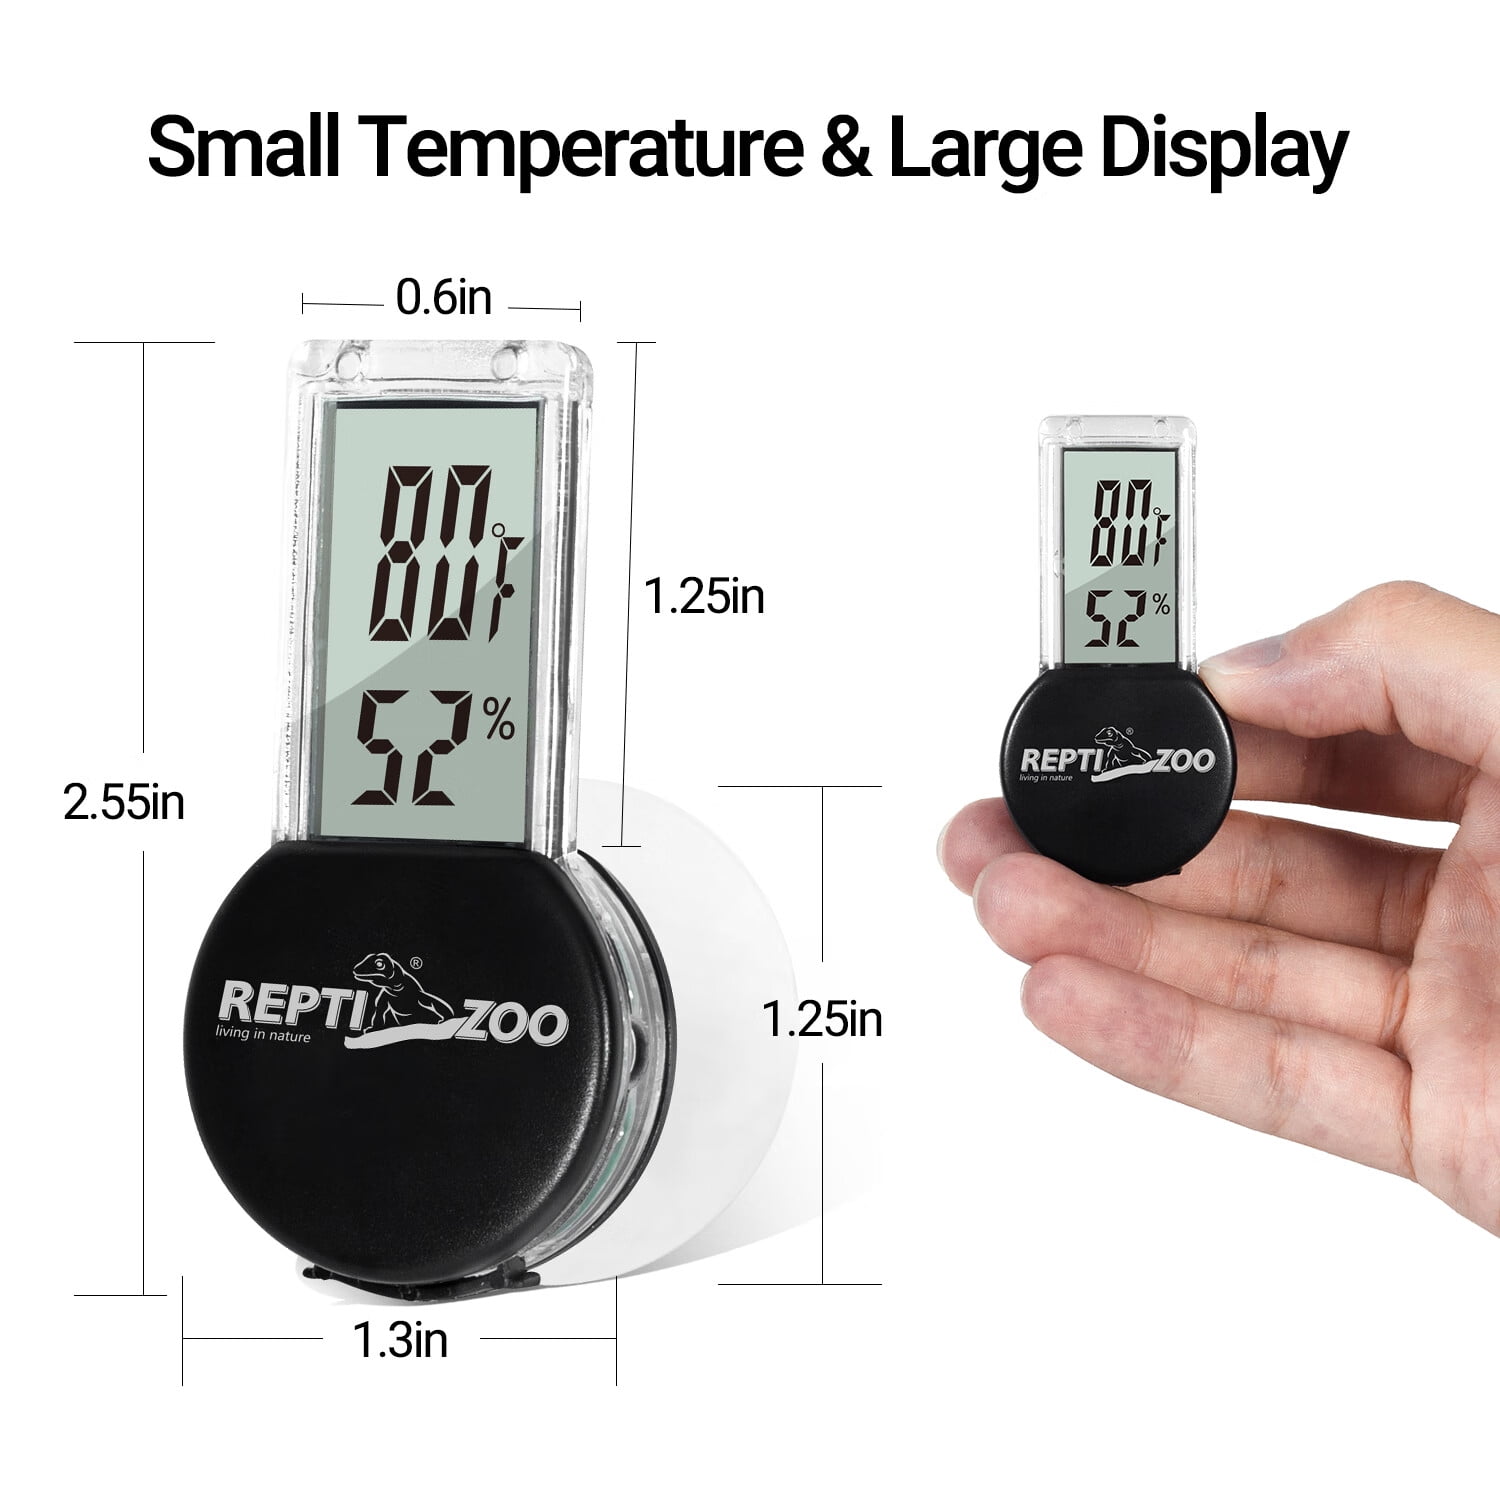 ECOSUB Reptile Digital Thermometer Hygrometer Accurate LCD Display